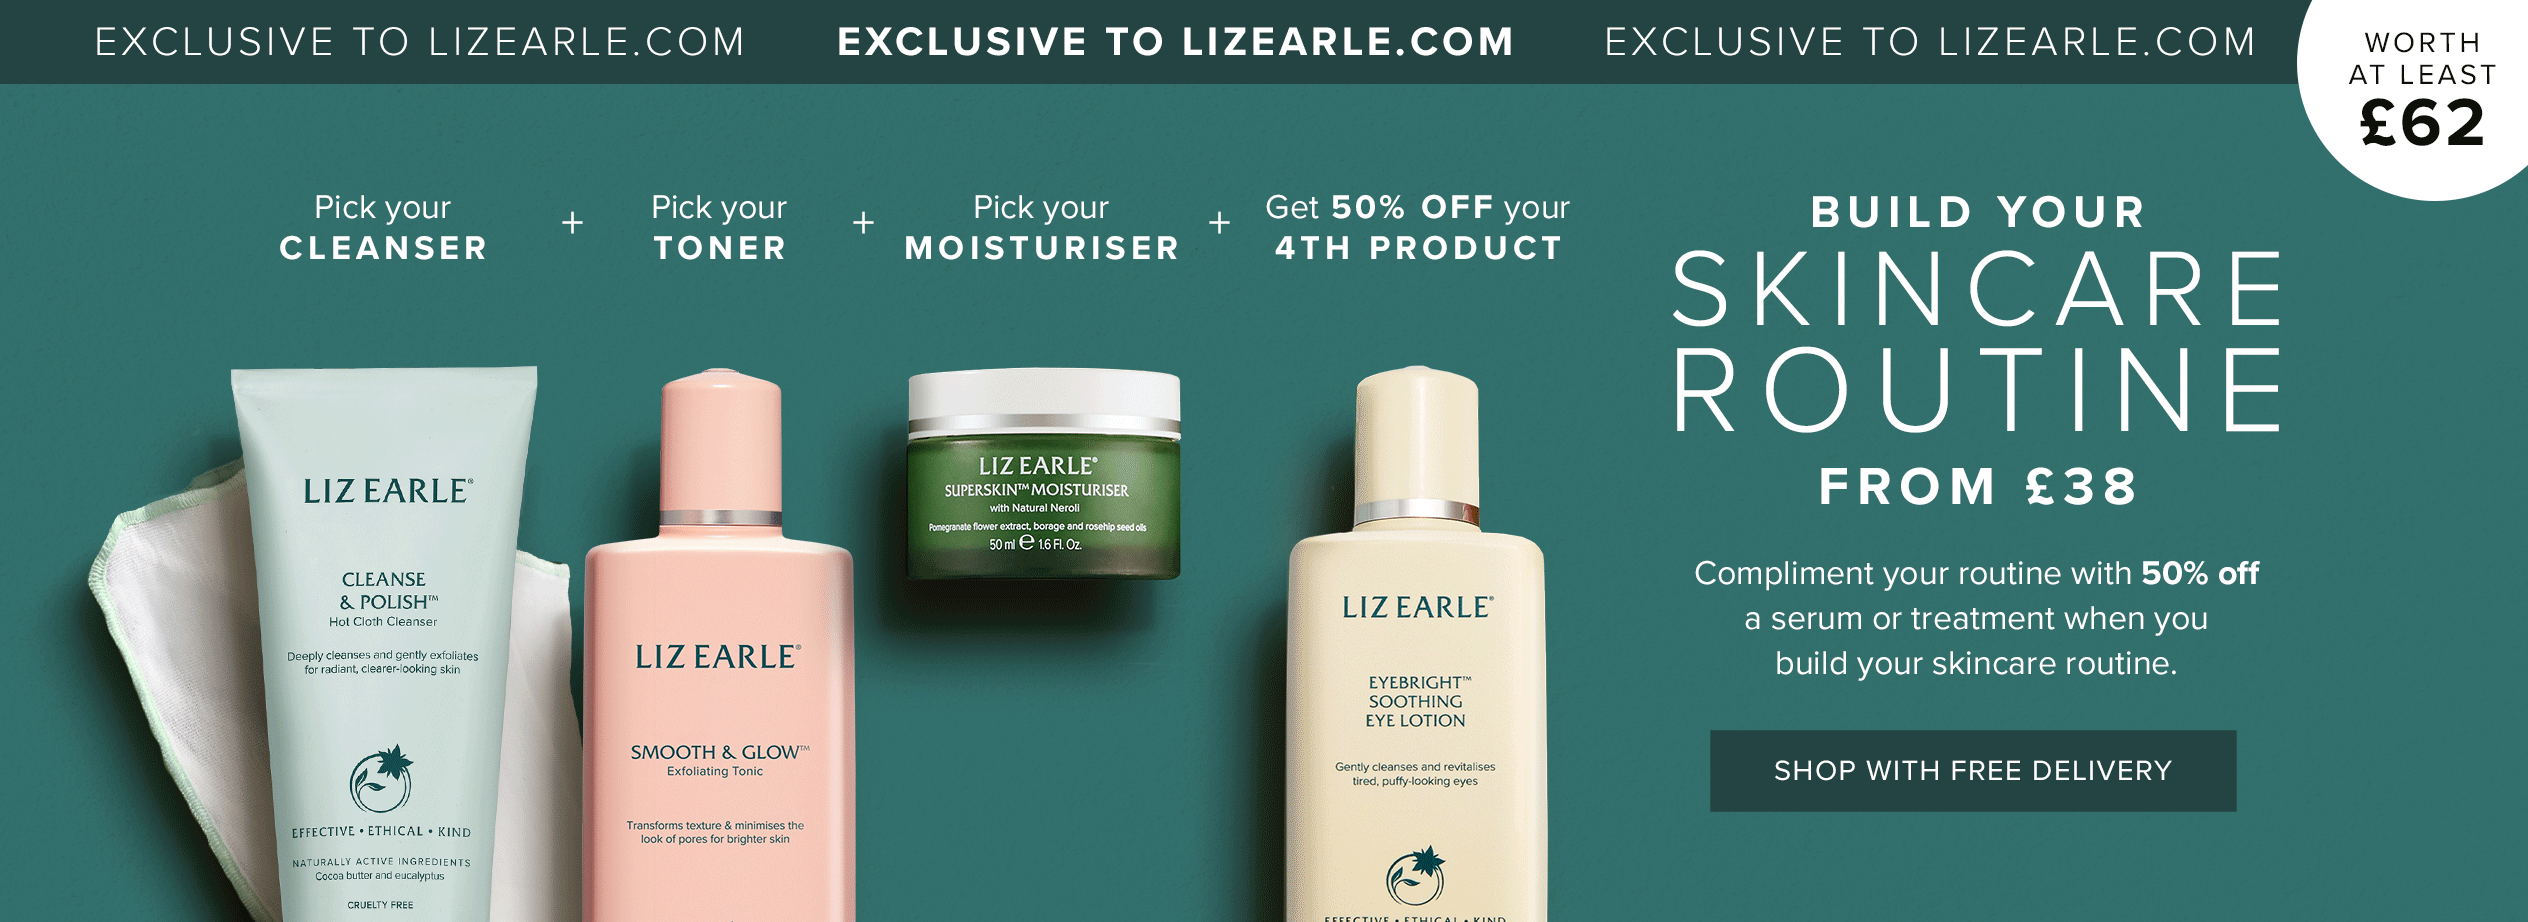 https://www.lizearle.com/dw/image/v2/BGJR_PRD/on/demandware.static/-/Library-Sites-le-content-global/default/dw0c0a5367/images/hp/Hero/BYSR-March-Mhero-Carousel-Free-Product-Focus_desktop.gif?sw=2528&q=85